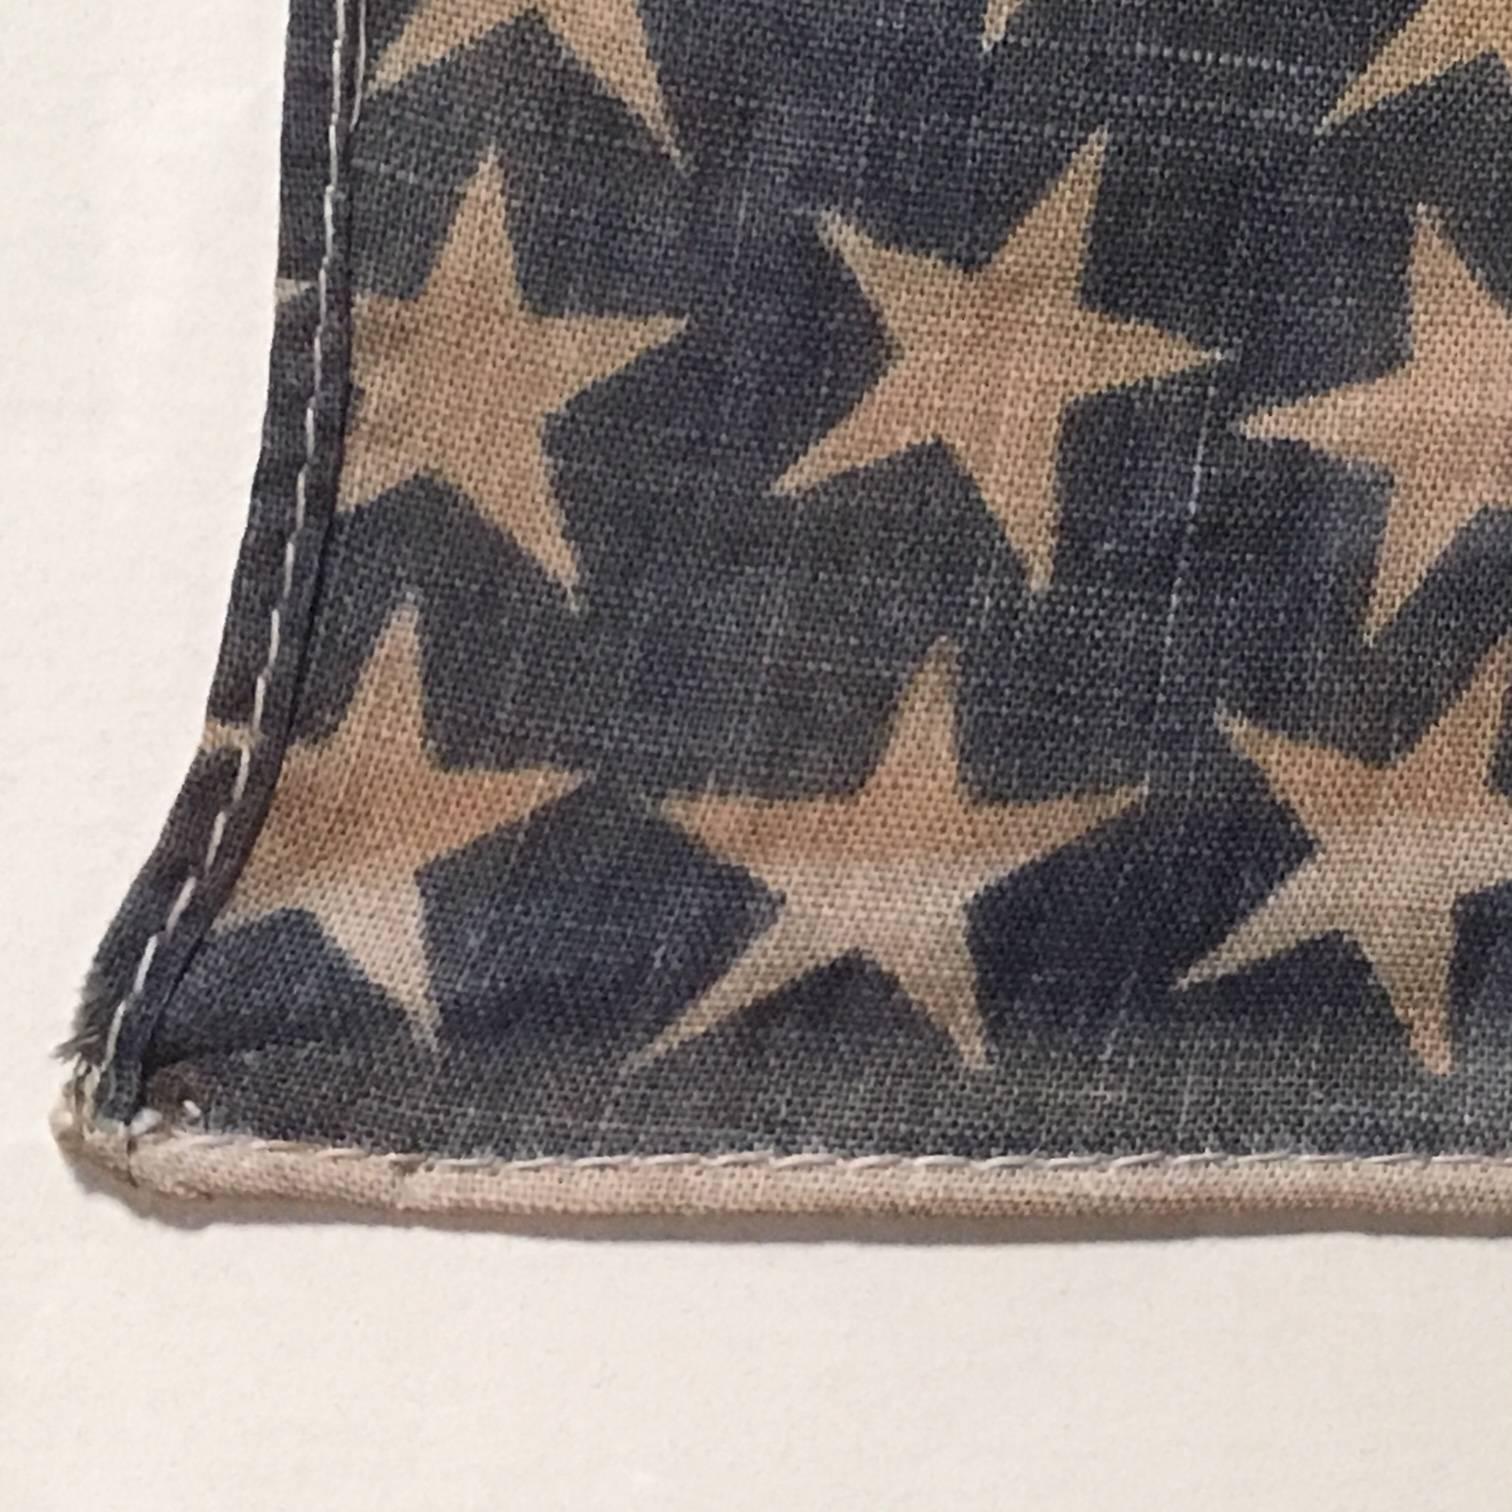 Other Antique American 46 Star Flag from 1908